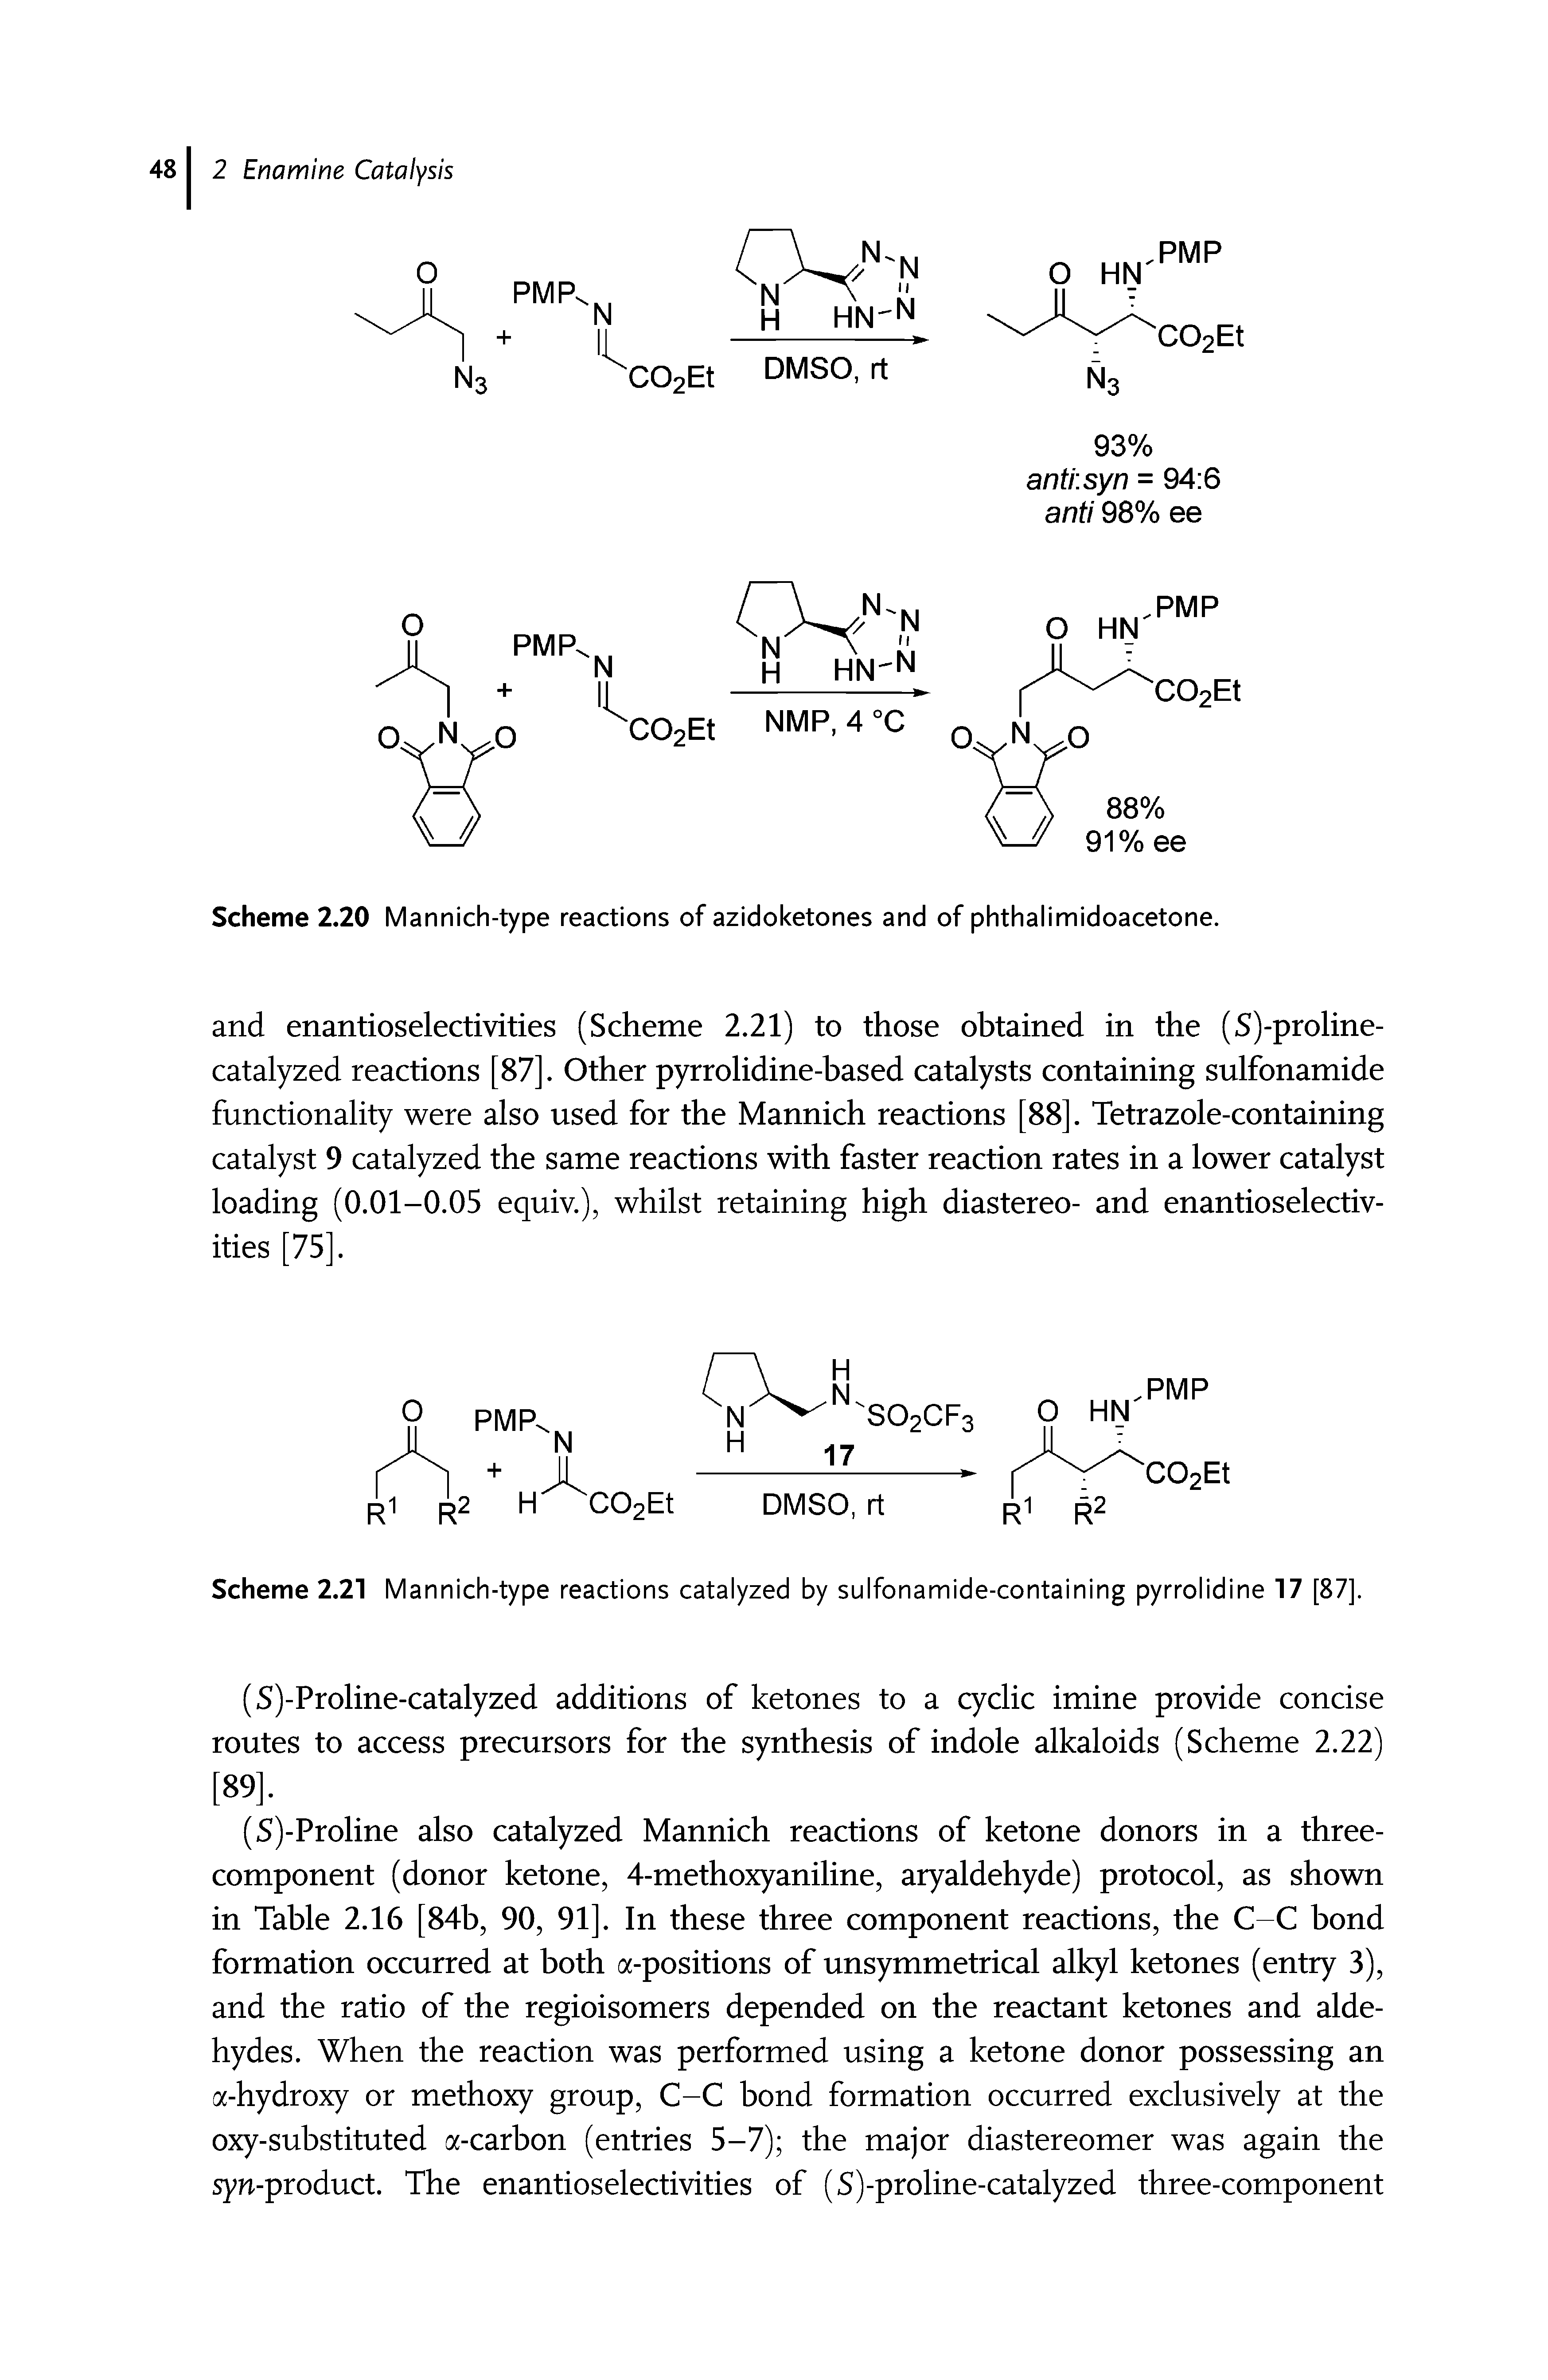 Scheme 2.21 Mannich-type reactions catalyzed by sulfonamide-containing pyrrolidine 17 [87].